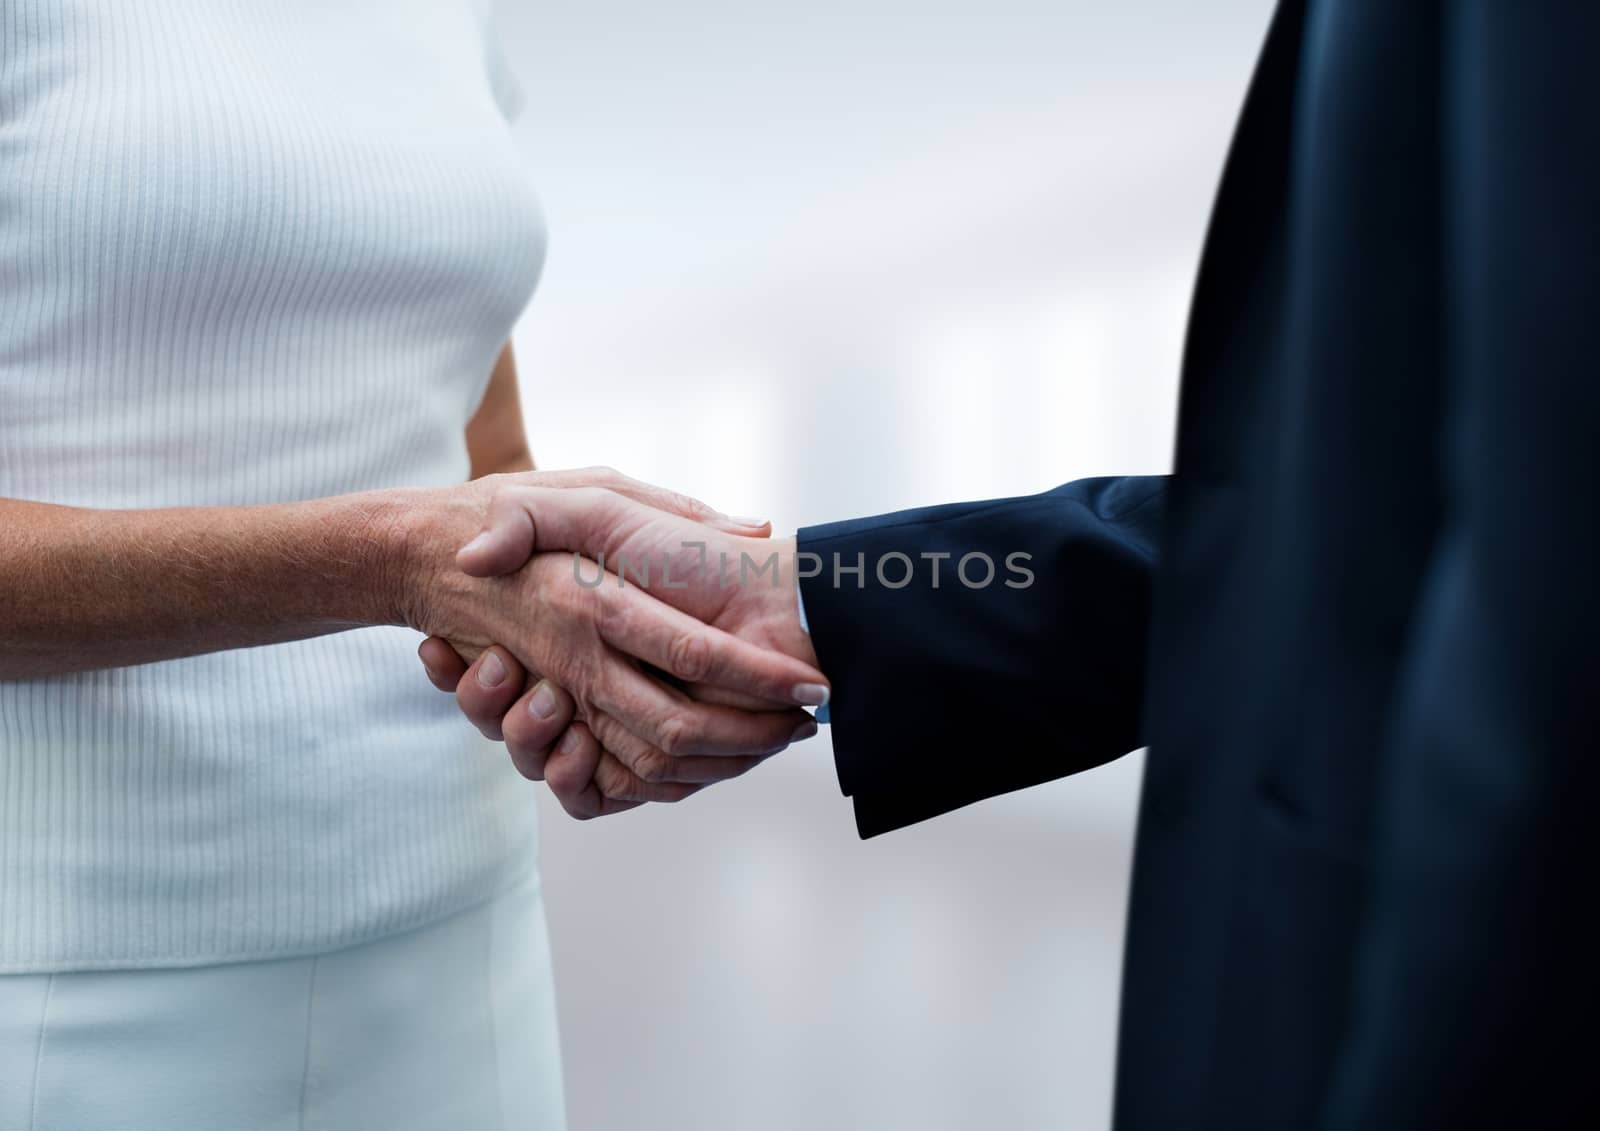 Digital composite of Business people shaking hands against white background